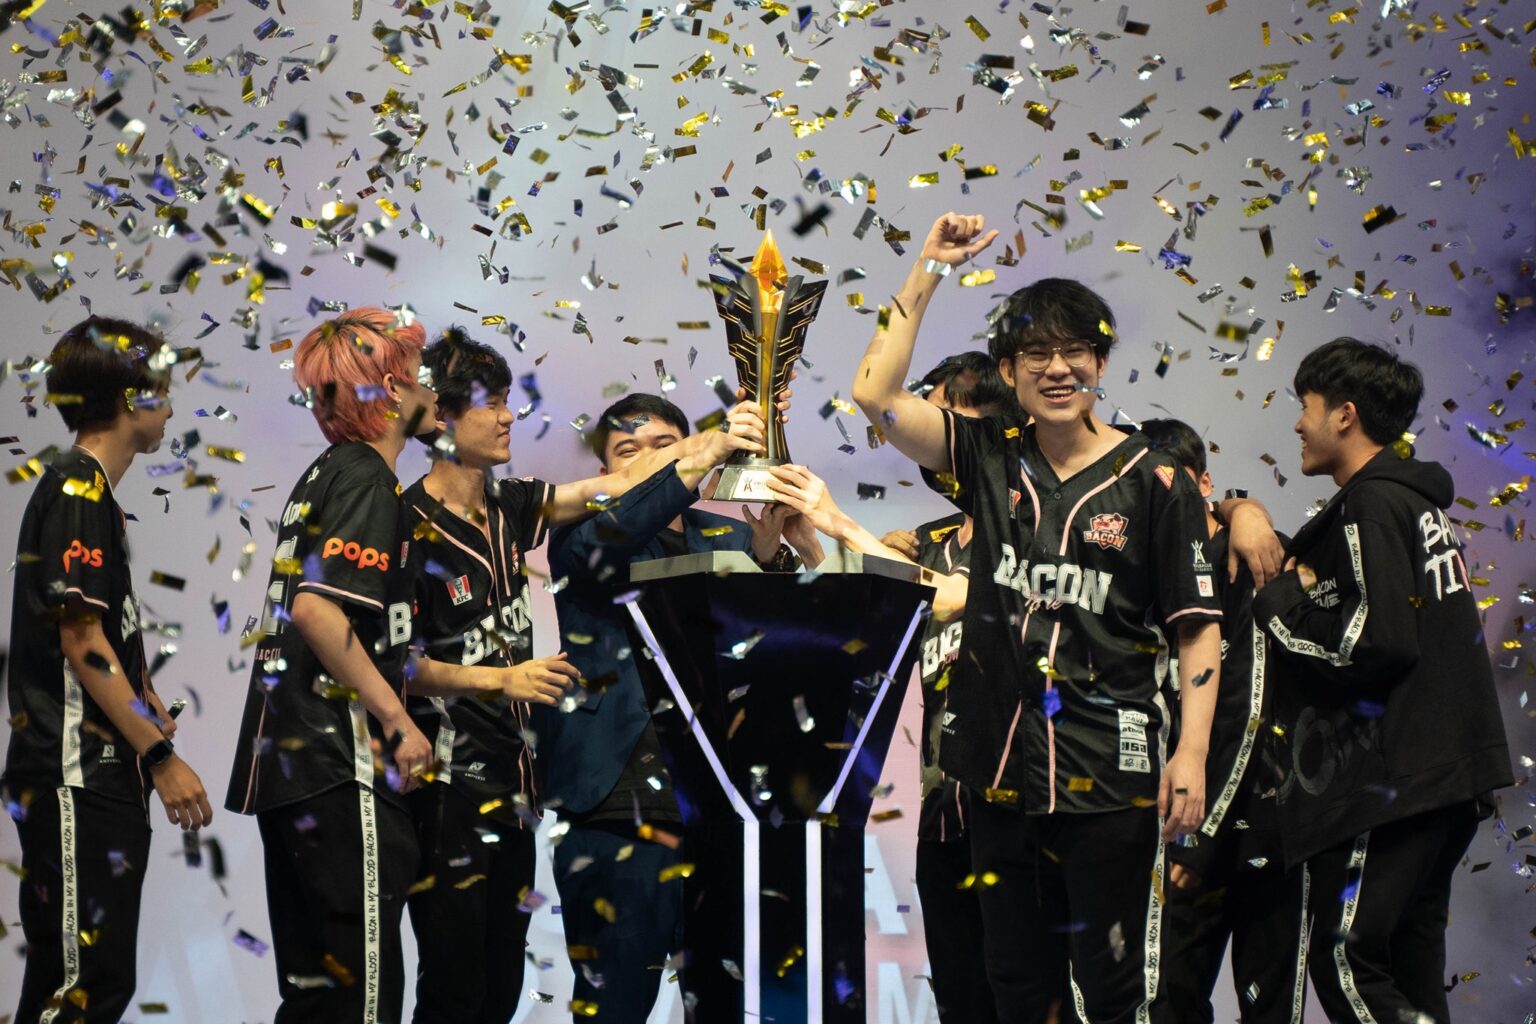 Bacon Time are your RoV Pro League 2021 Summer Champions ONE Esports